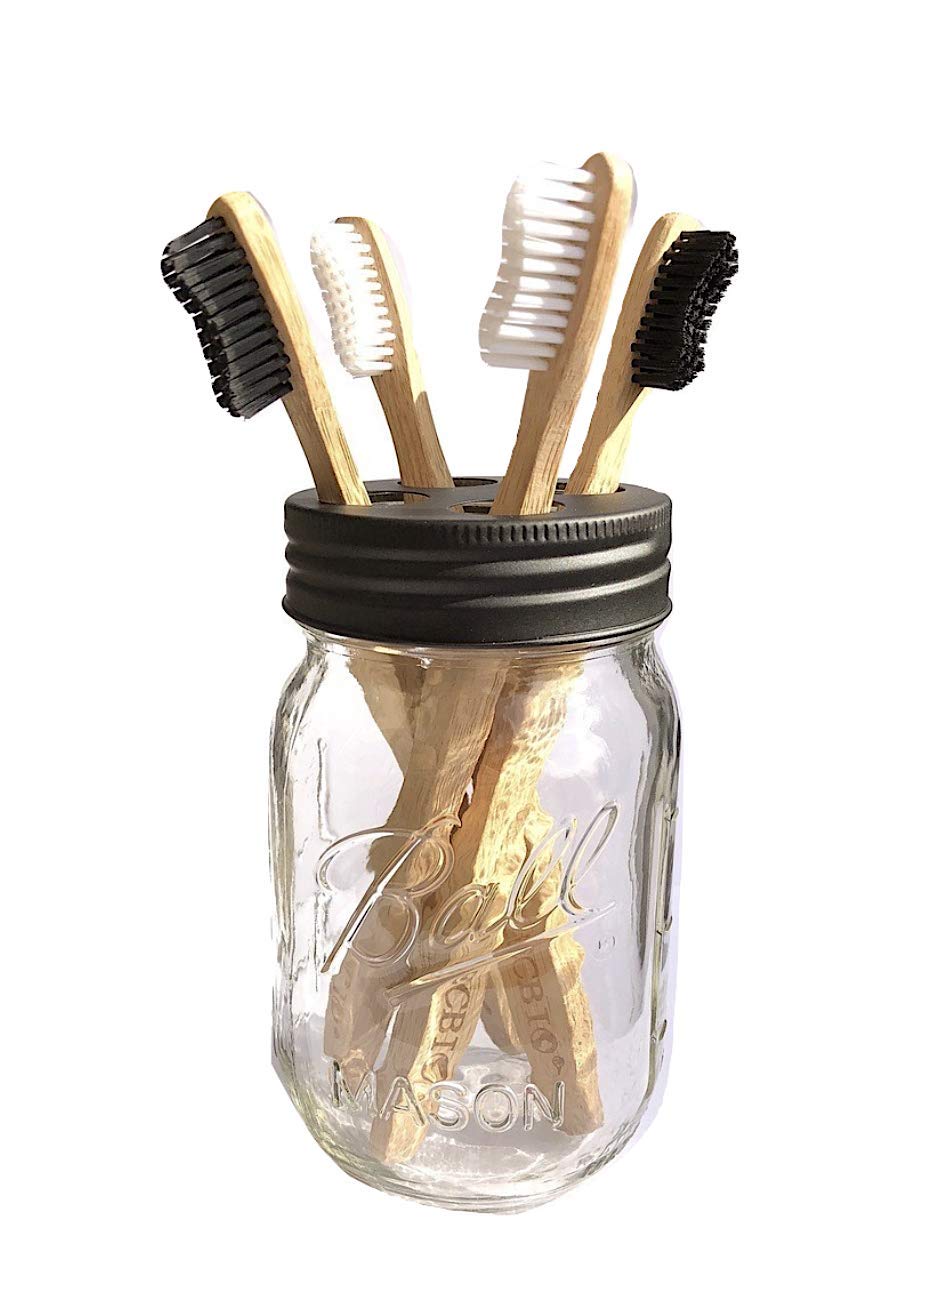 Book Cover The Southern Jarring Co. Mason Jar Toothbrush Holder - Includes Genuine Glass 16 Ounce Ball Mason Jar - Made from Rustproof Stainless Steel - Holds 4 Toothbrushes (Black)